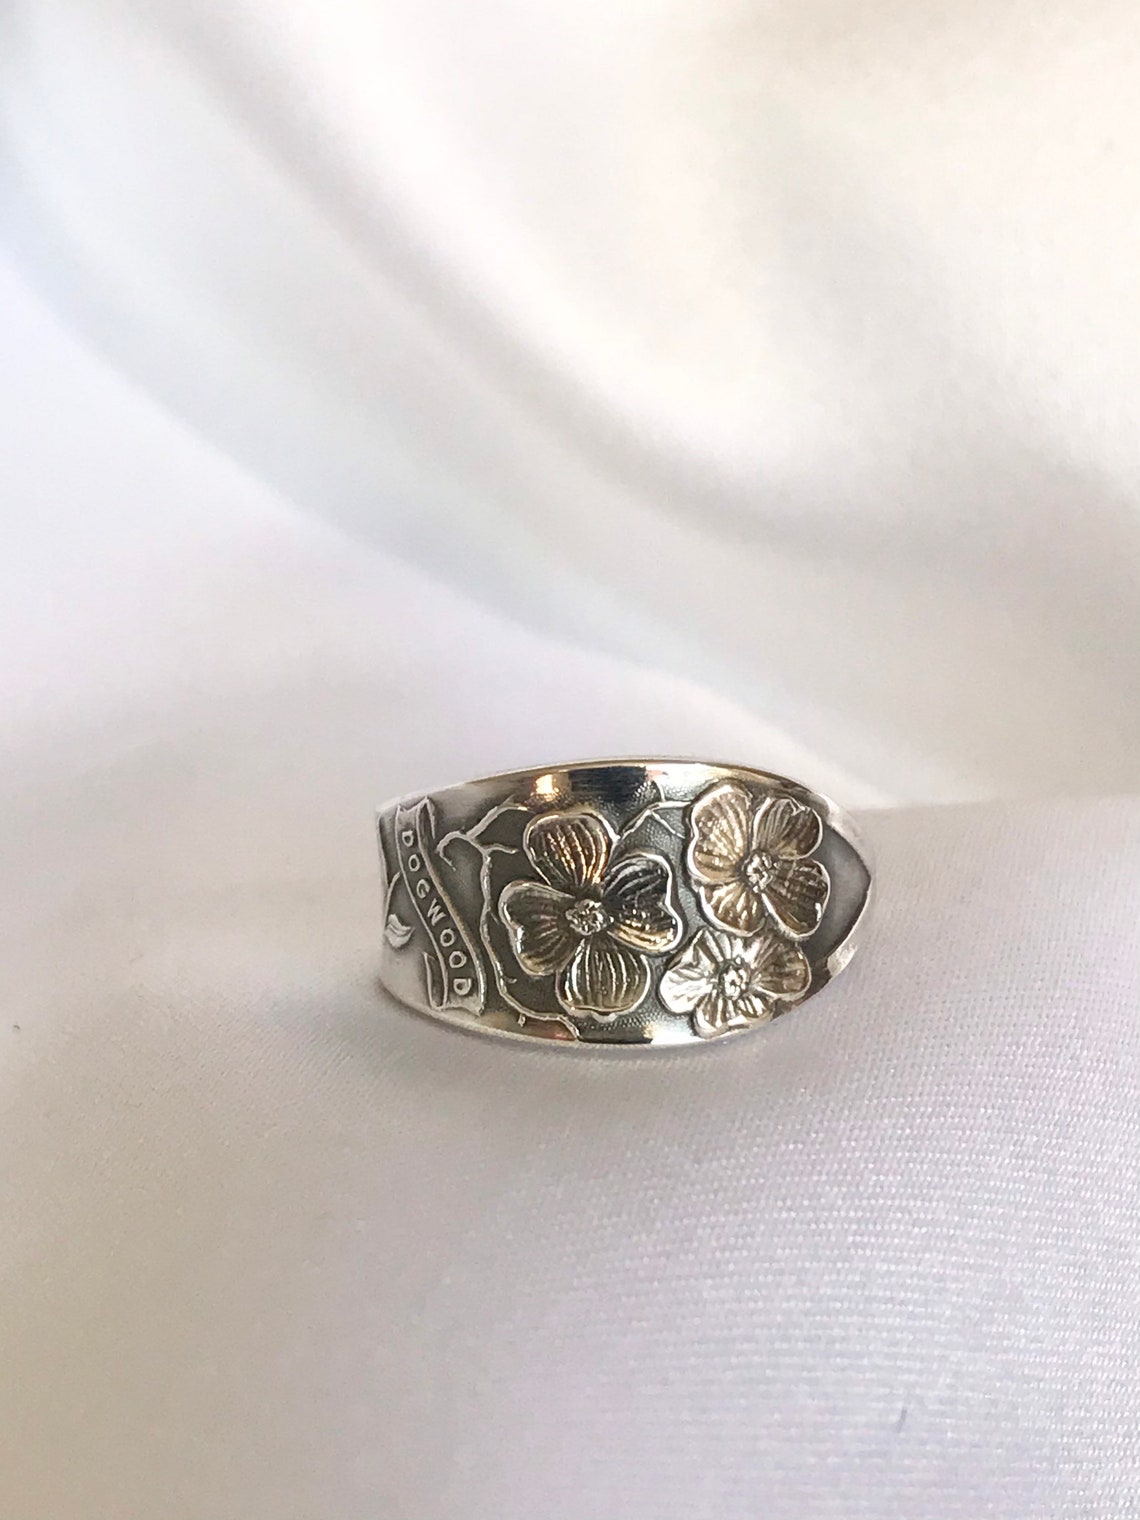 Dogwood Sterling Spoon Ring Antique Spoon Spoon Ring Symbolic | Etsy